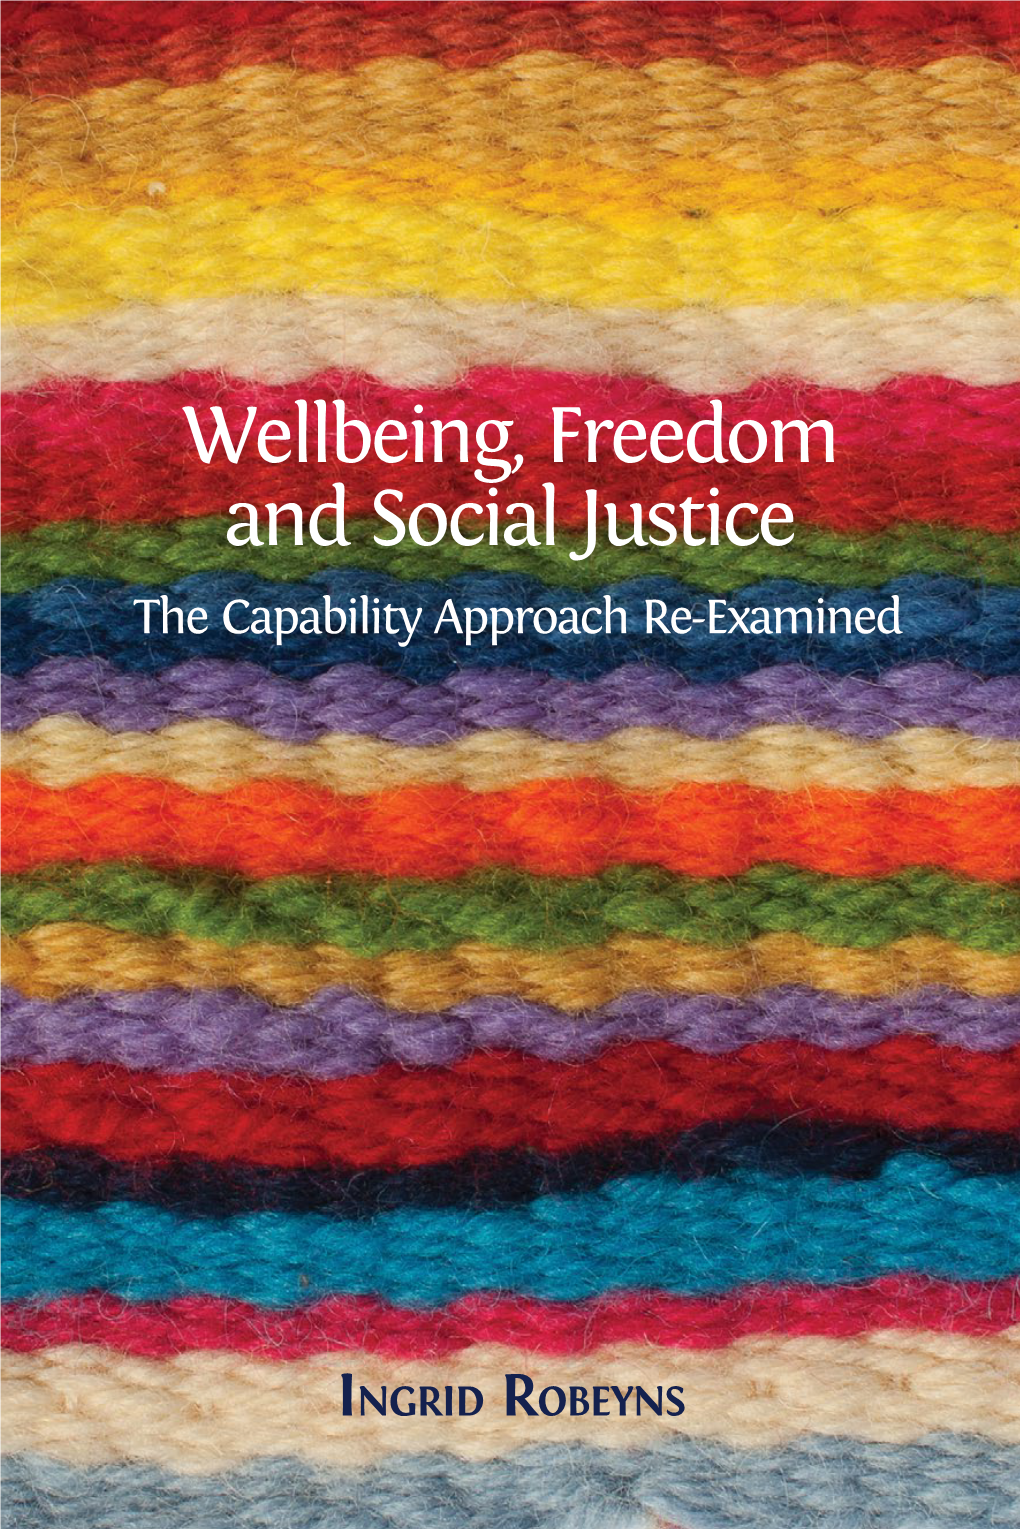 Wellbeing, Freedom and Social Justice the Capability Approach Re-Examined